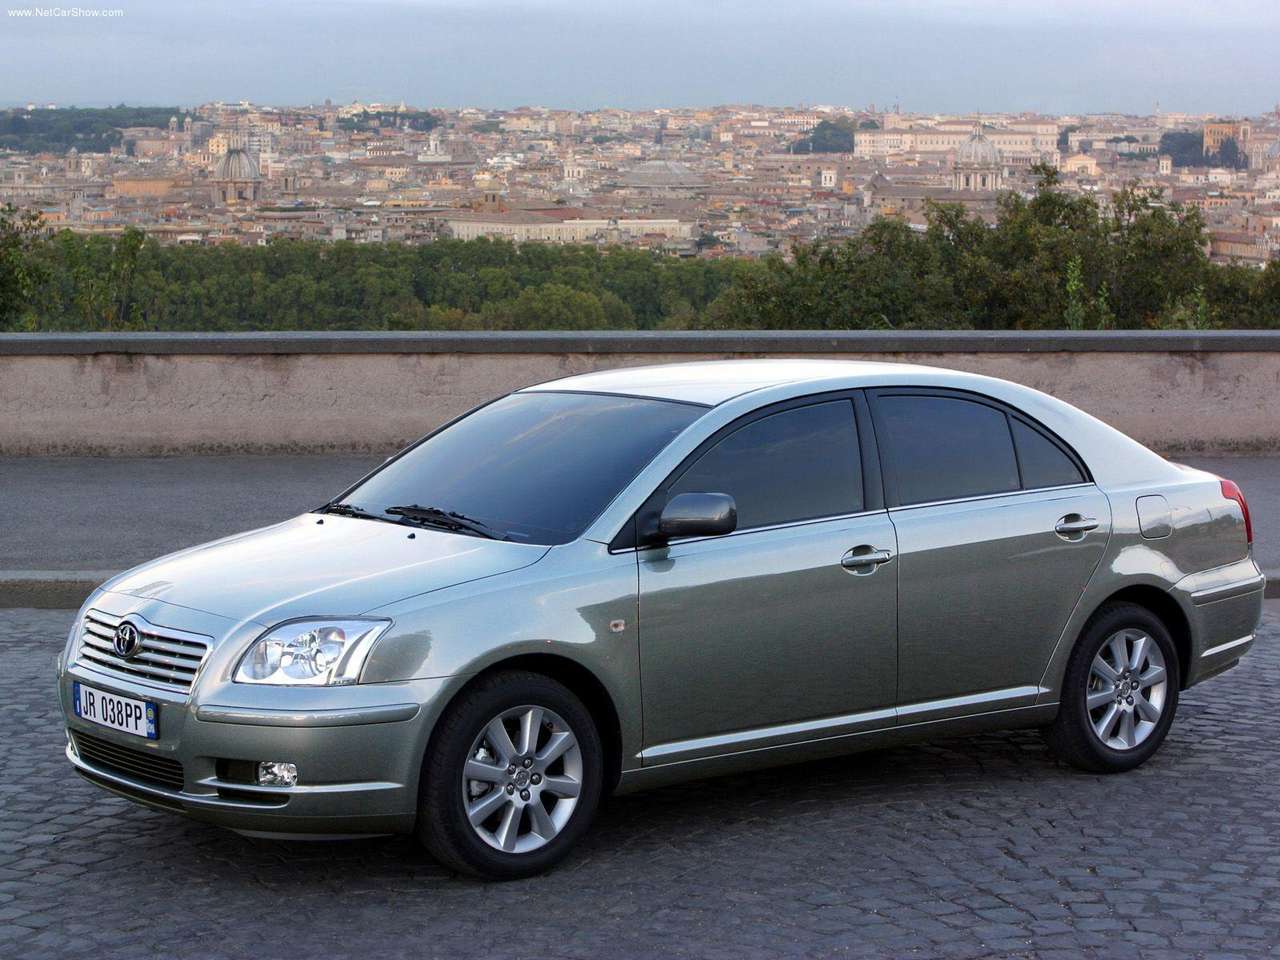 Toyota Avensis I Restyling 2000 - 2003 Station wagon 5 door #5